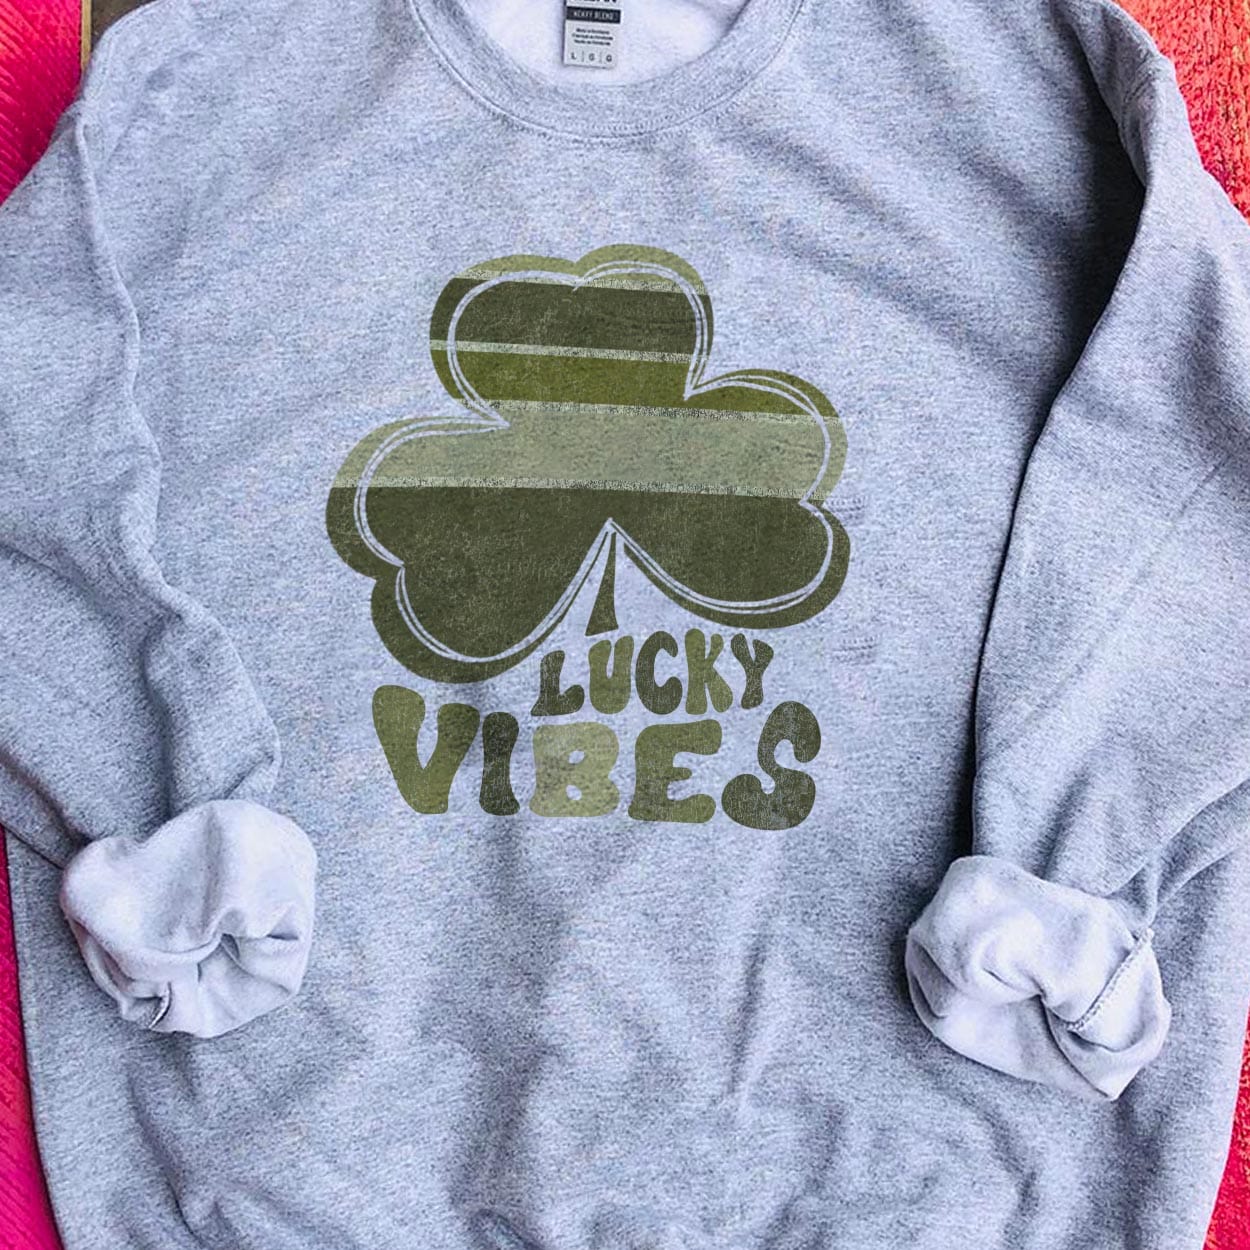 A gray crew neck sweatshirt featuring a large graphic of a clover with various shades of green and the words "lucky vibes" below it with each letter coordinating to a color in the clover. Item is pictured on a pink background.